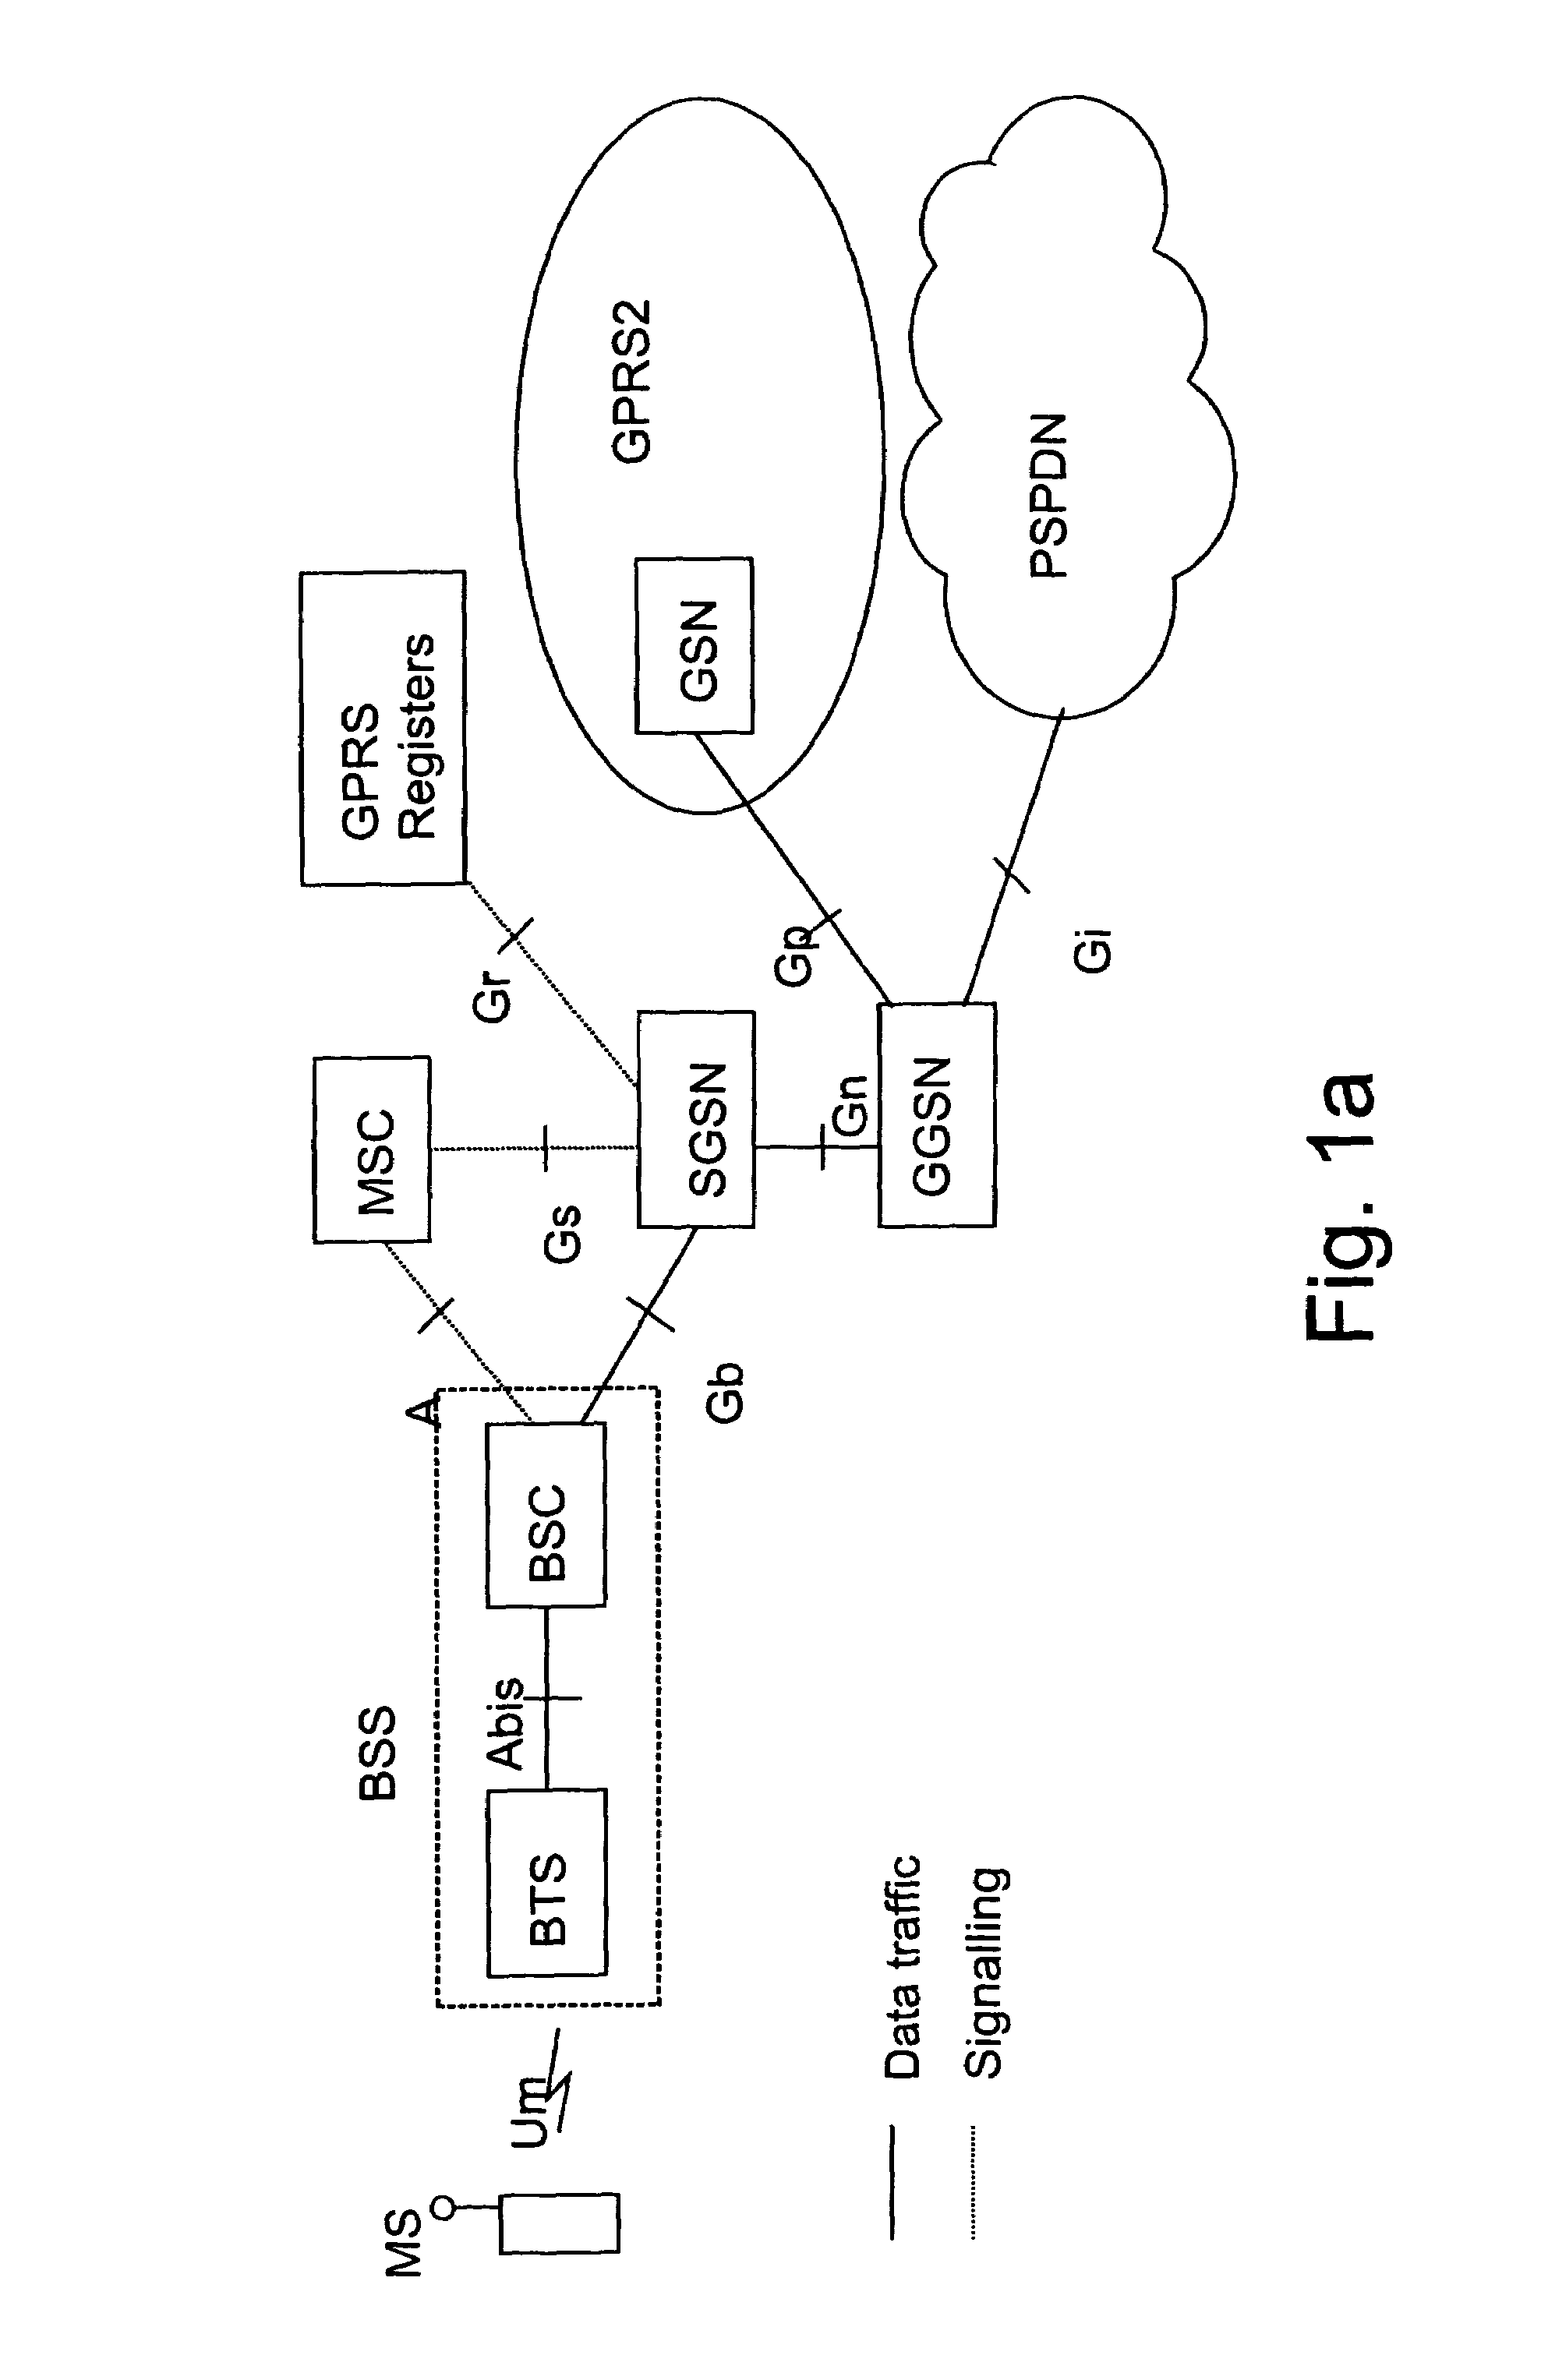 Method for selecting a bearer service for a service in a mobile telecommunications system